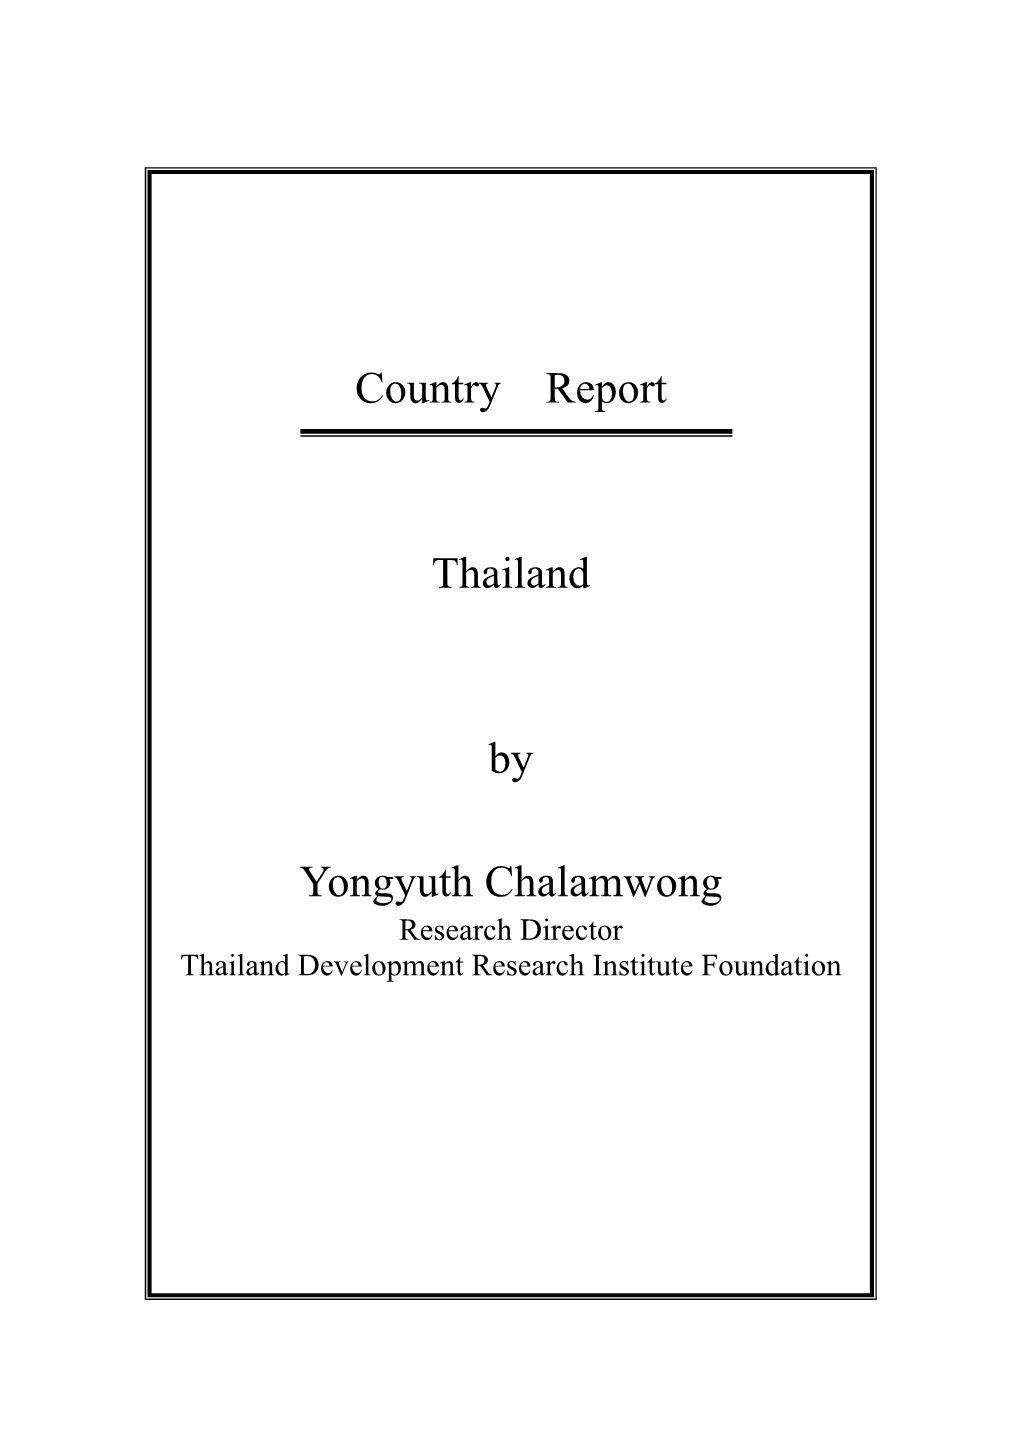 Country Report Thailand by Yongyuth Chalamwong